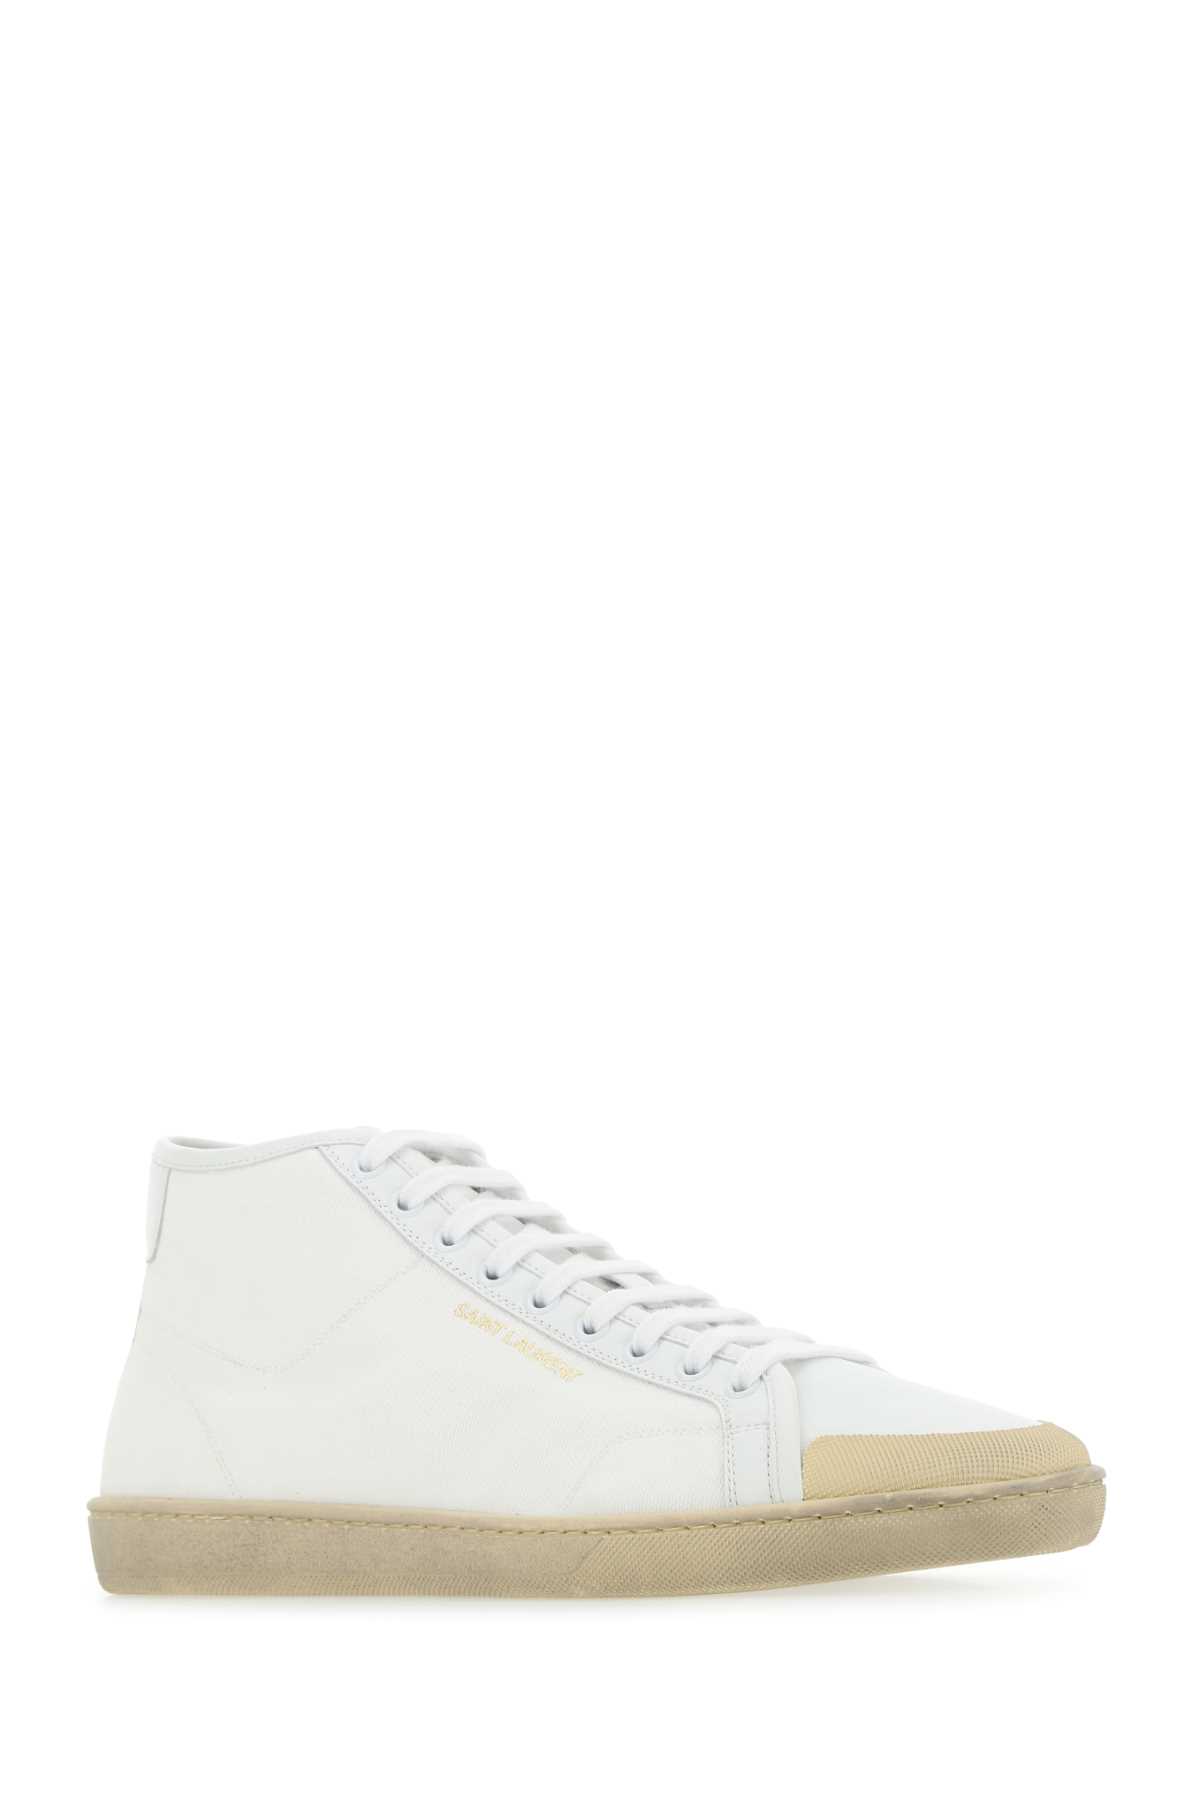 Saint Laurent White Canvas And Leather Court Classic Sl/39 Sneakers In 9026